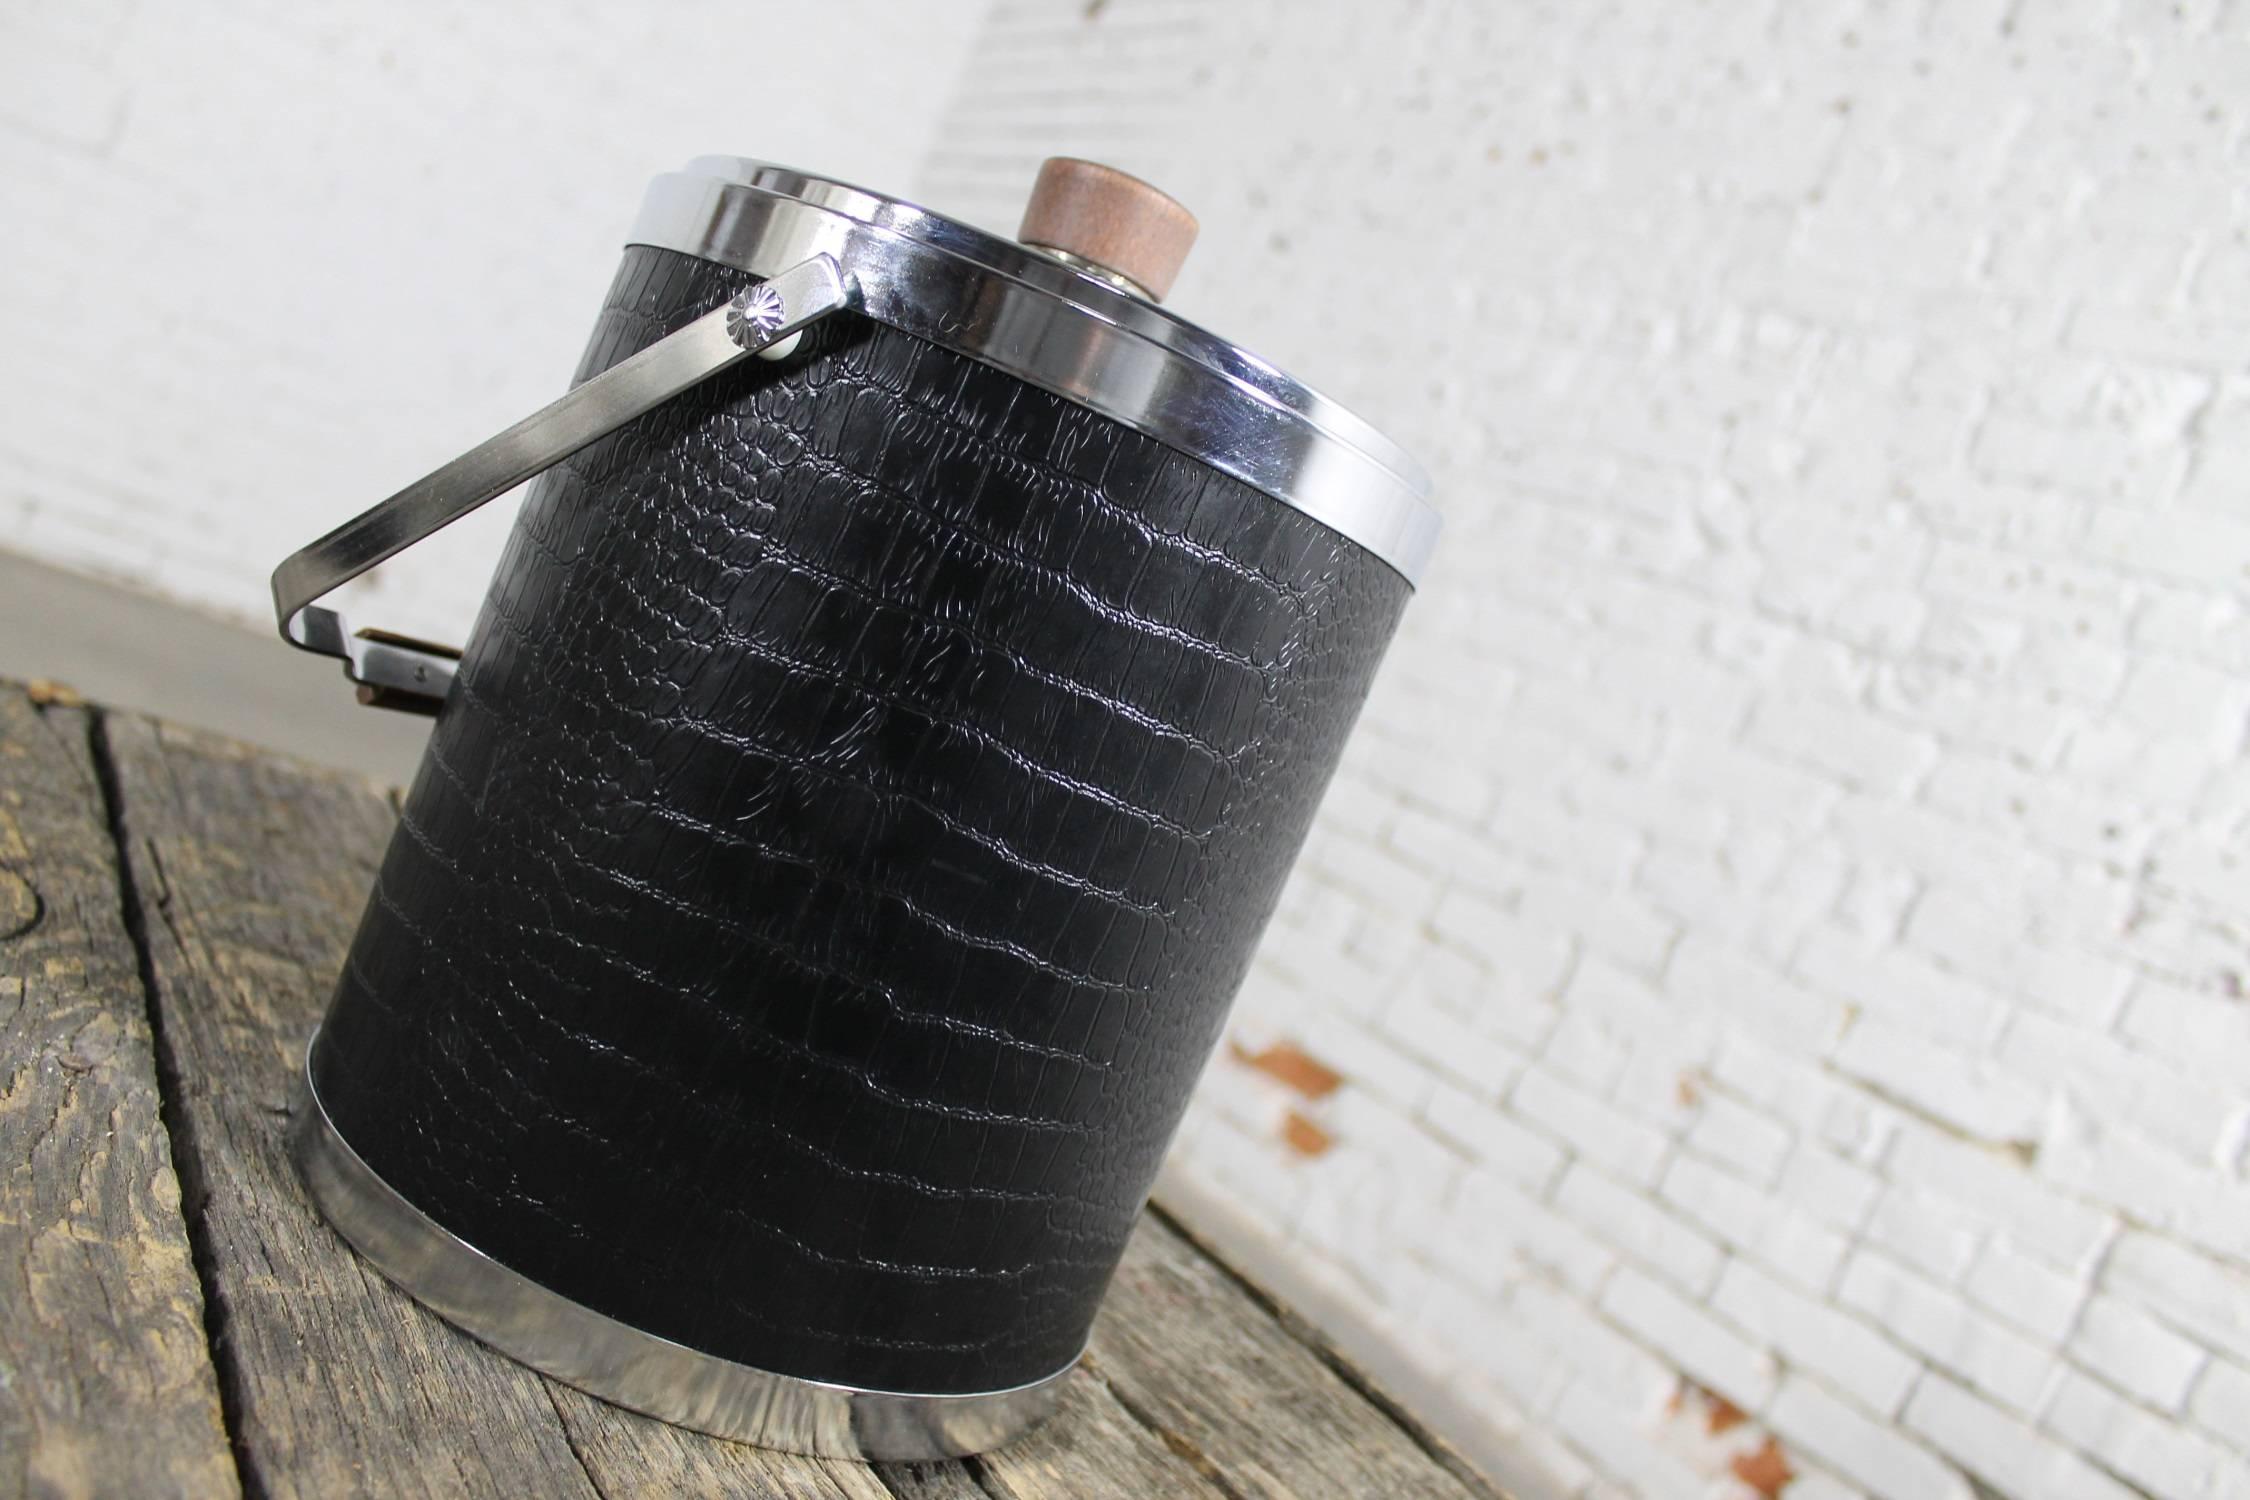 Handsome Mid-Century Modern ice bucket by Kromex covered in black faux alligator or crocodile with chrome trim and lid; and, wood knob and handle. In wonderful vintage condition and ready to use, circa 1960.

“See you later alligator, after while